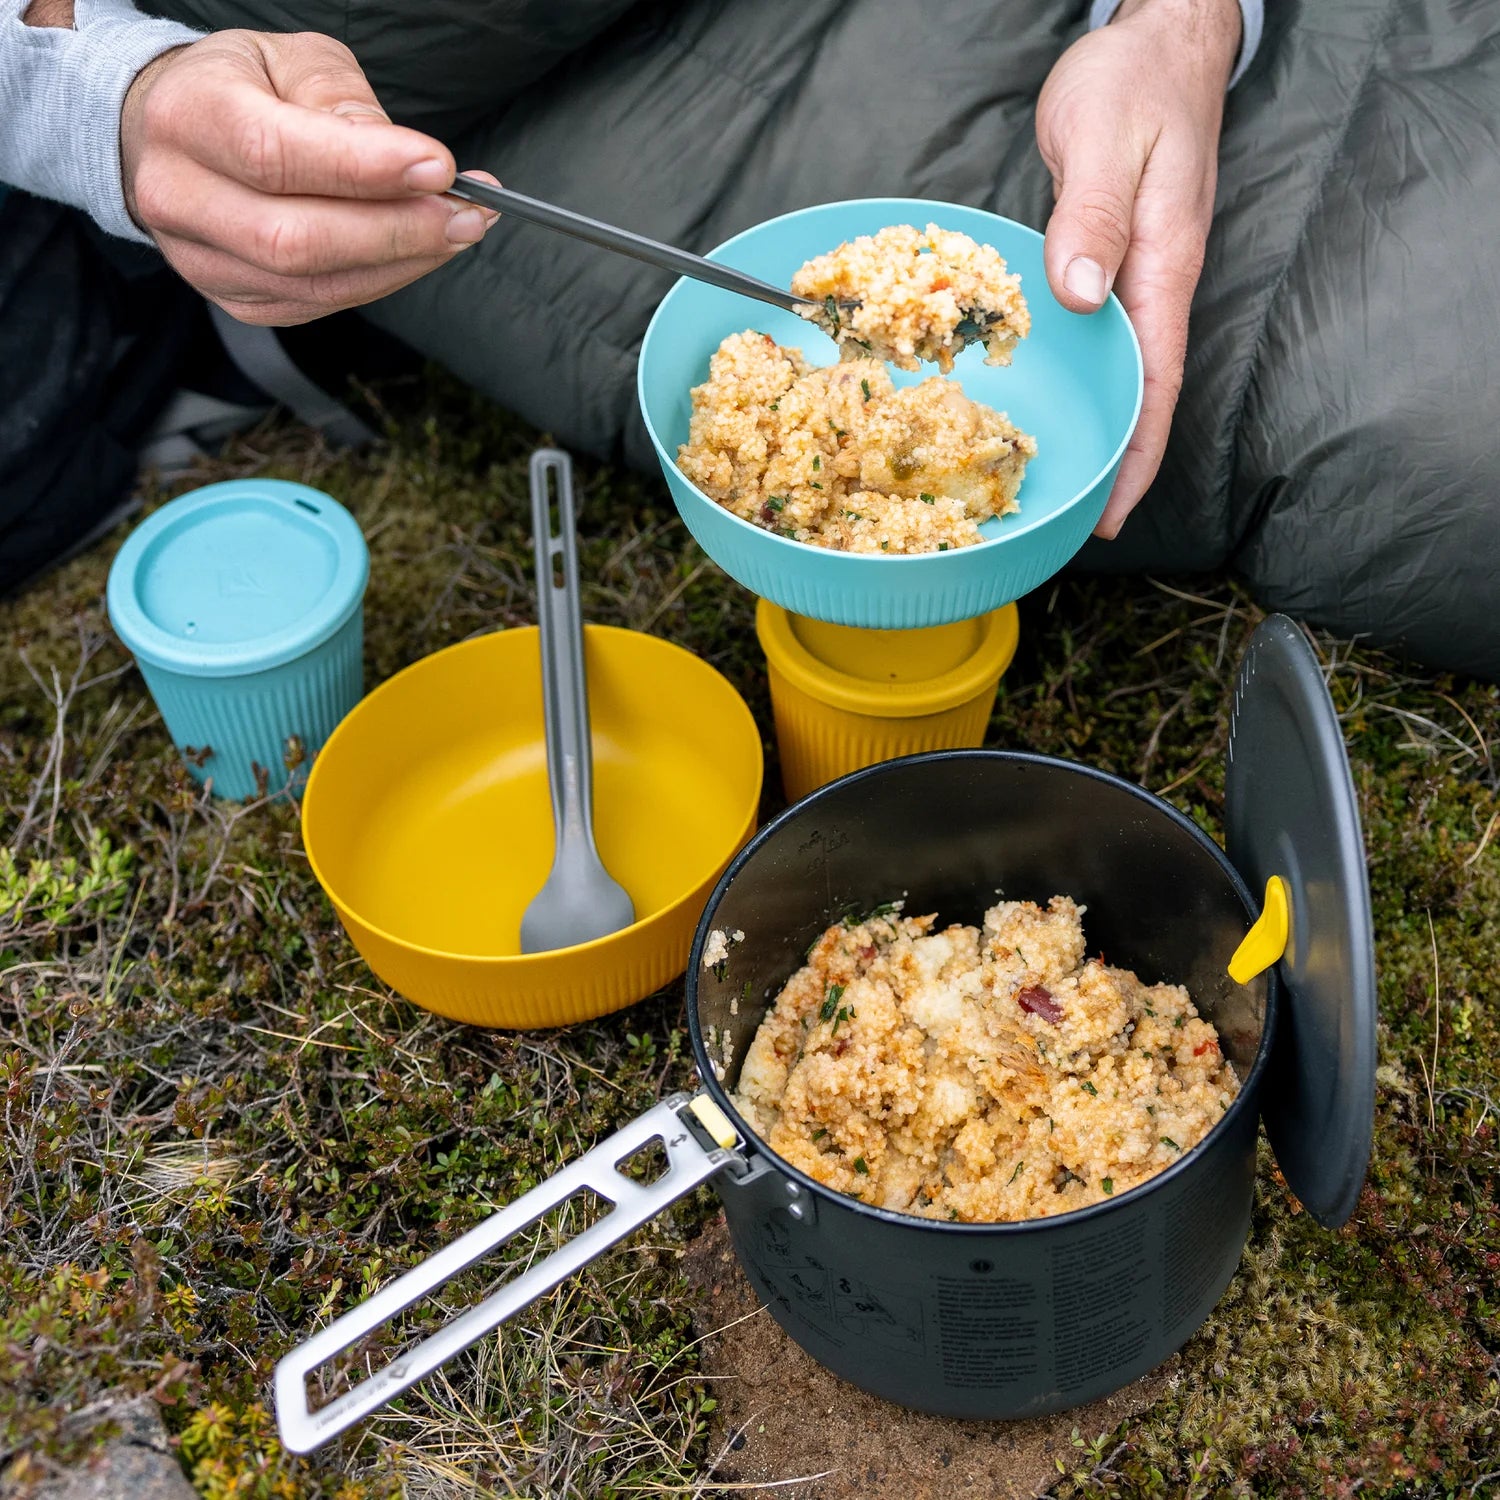 Sea to Summit Frontier UL Cutlery - 2 Piece Long Handle Spoon and Spork -  - Mansfield Hunting & Fishing - Products to prepare for Corona Virus